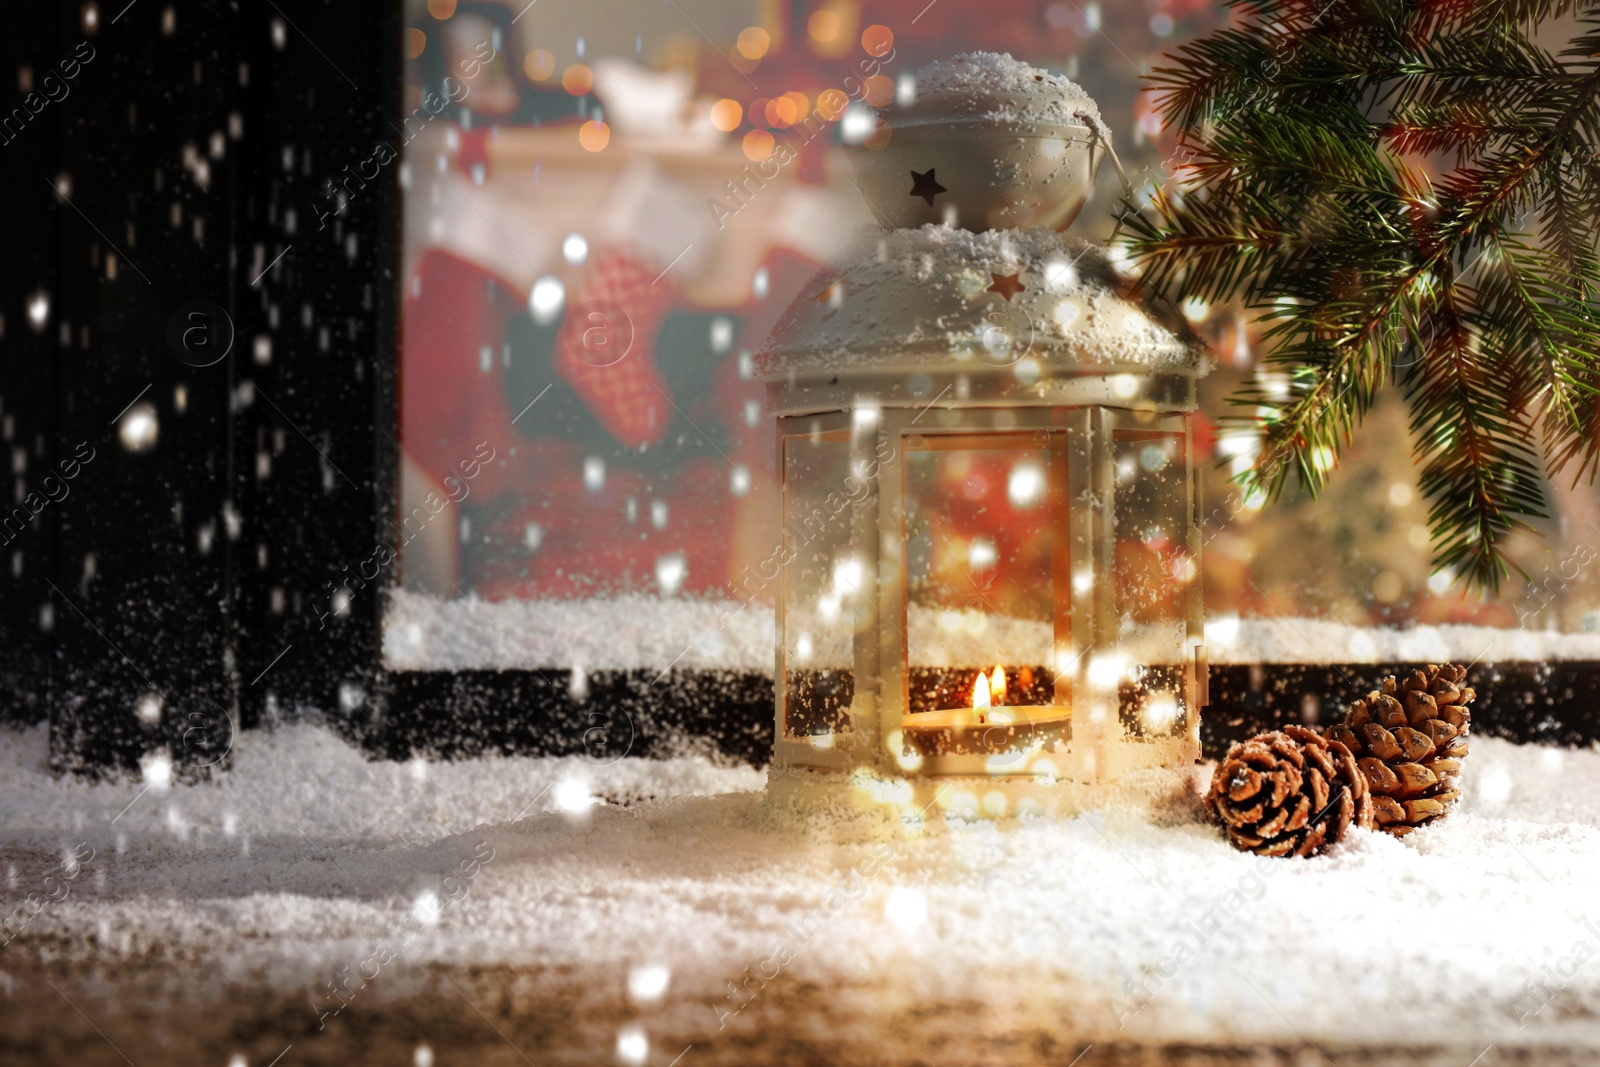 Image of Snow falling onto window sill with Christmas lantern outdoors